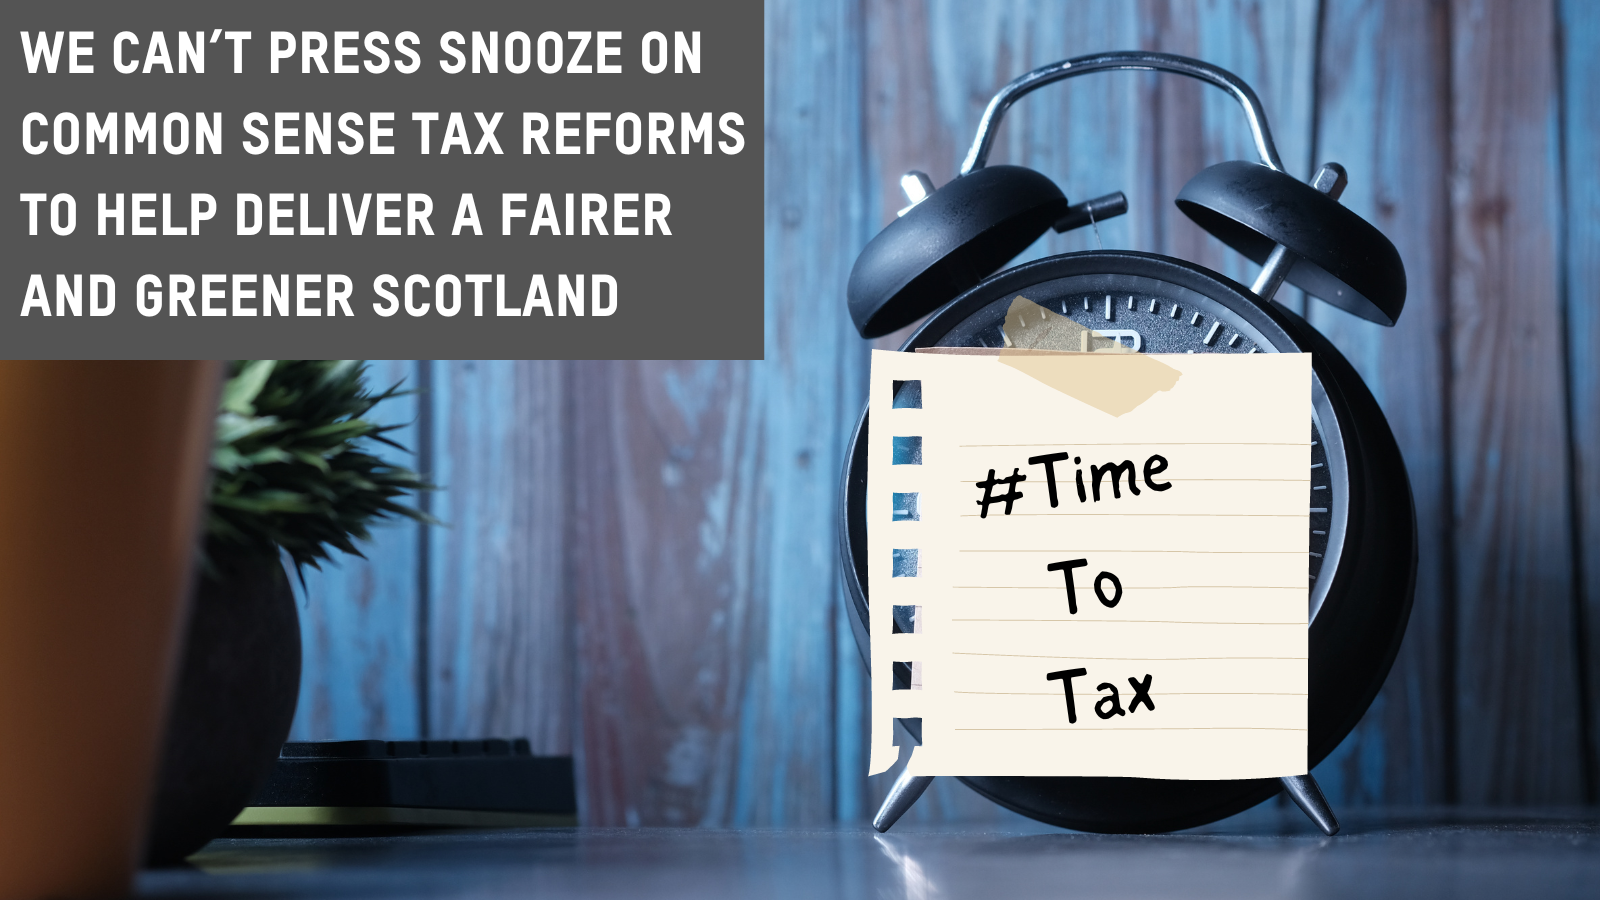 Ministers can’t press snooze on common sense, fair tax reforms